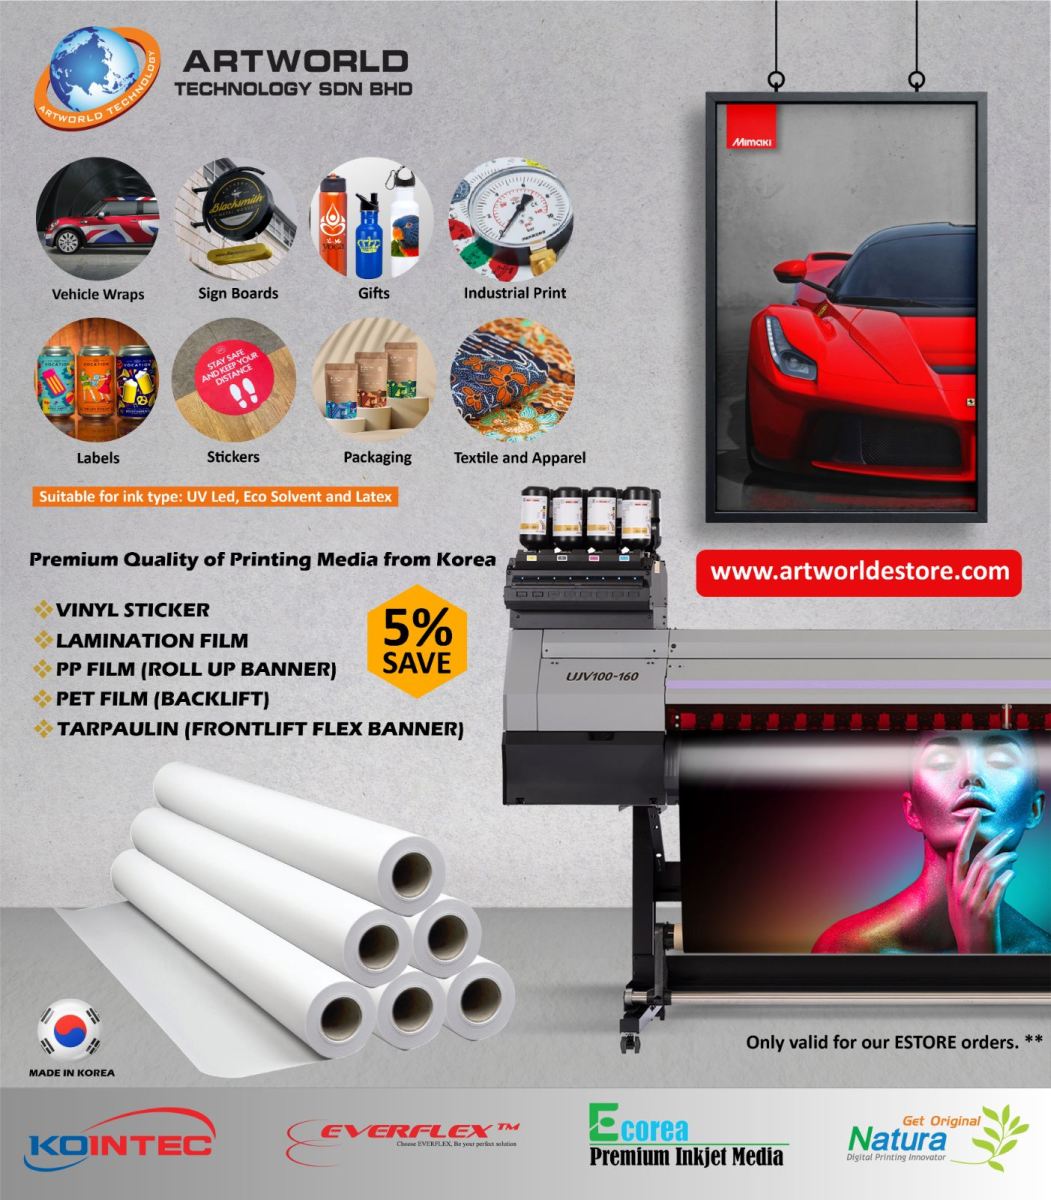 Ultimate Printing Experience with Our Premium Printing Material !